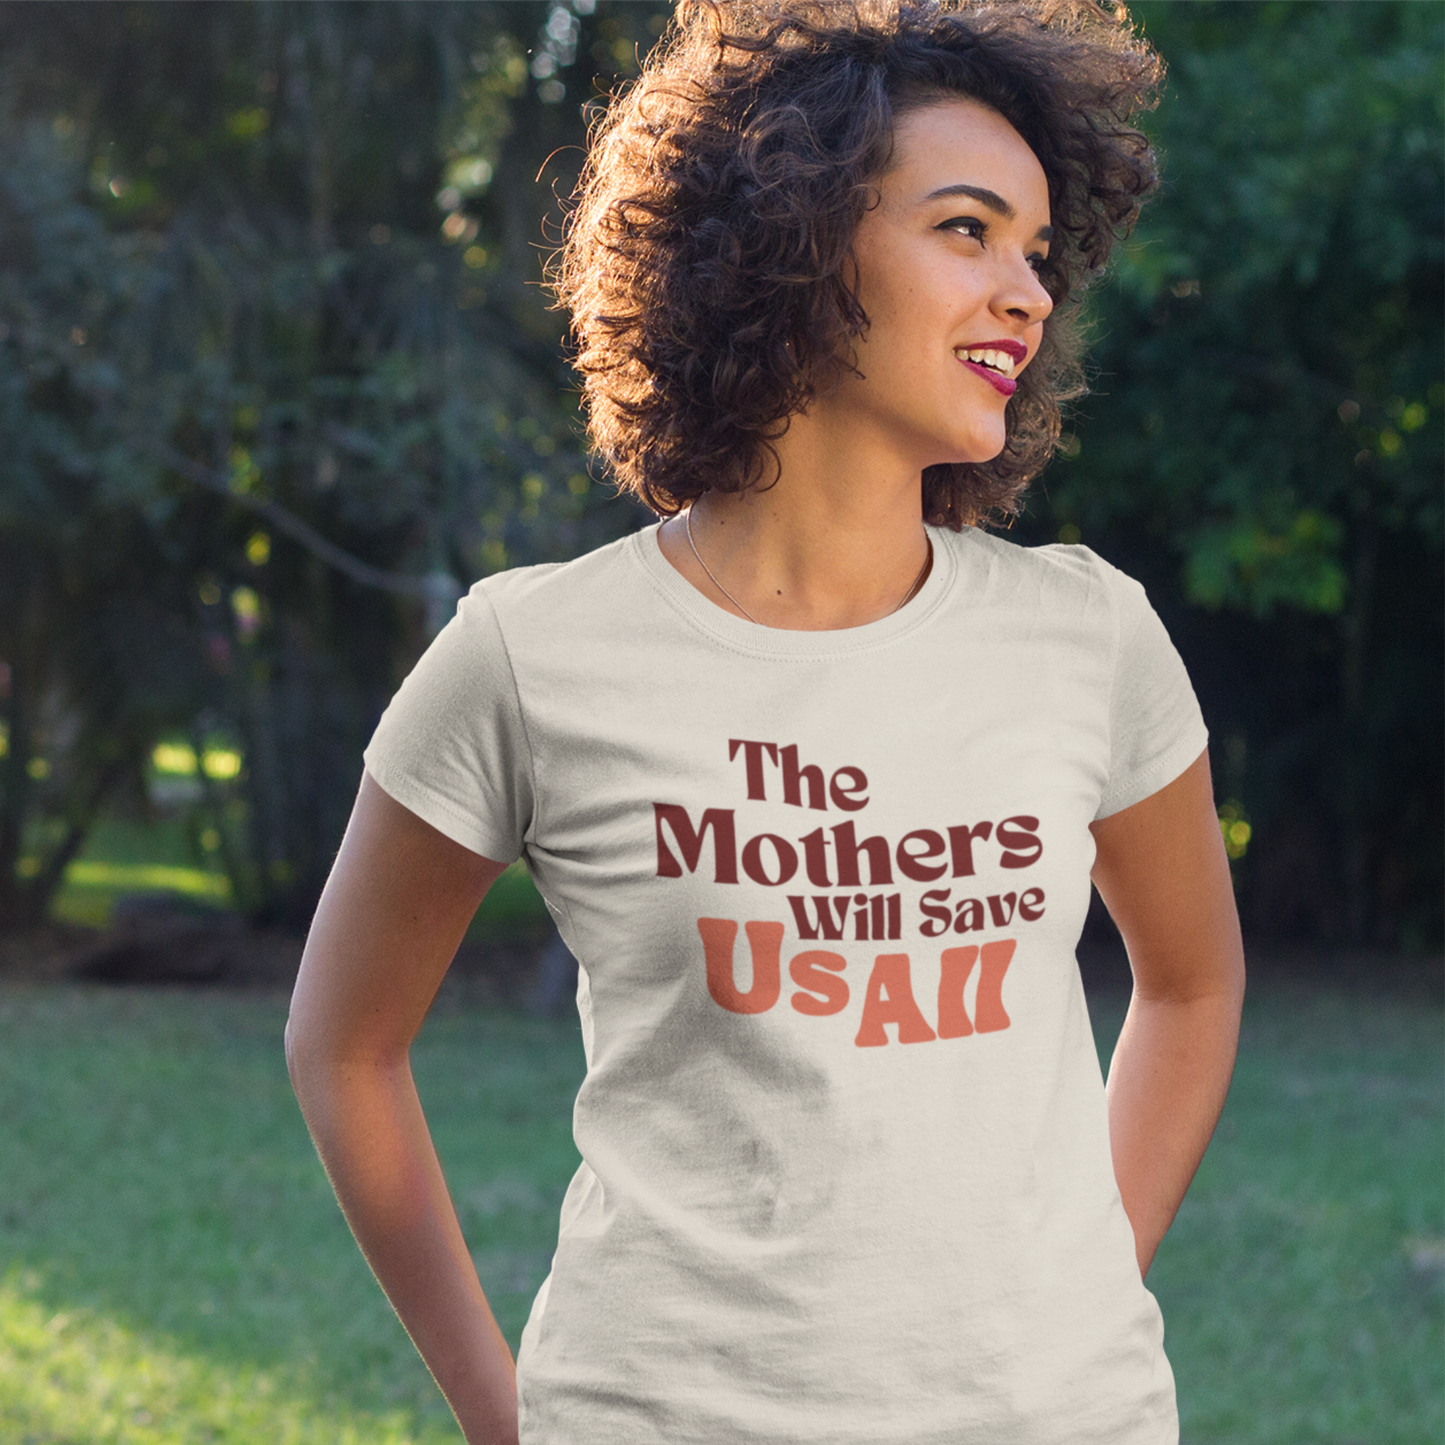 The Mothers Will Save Us All Tee